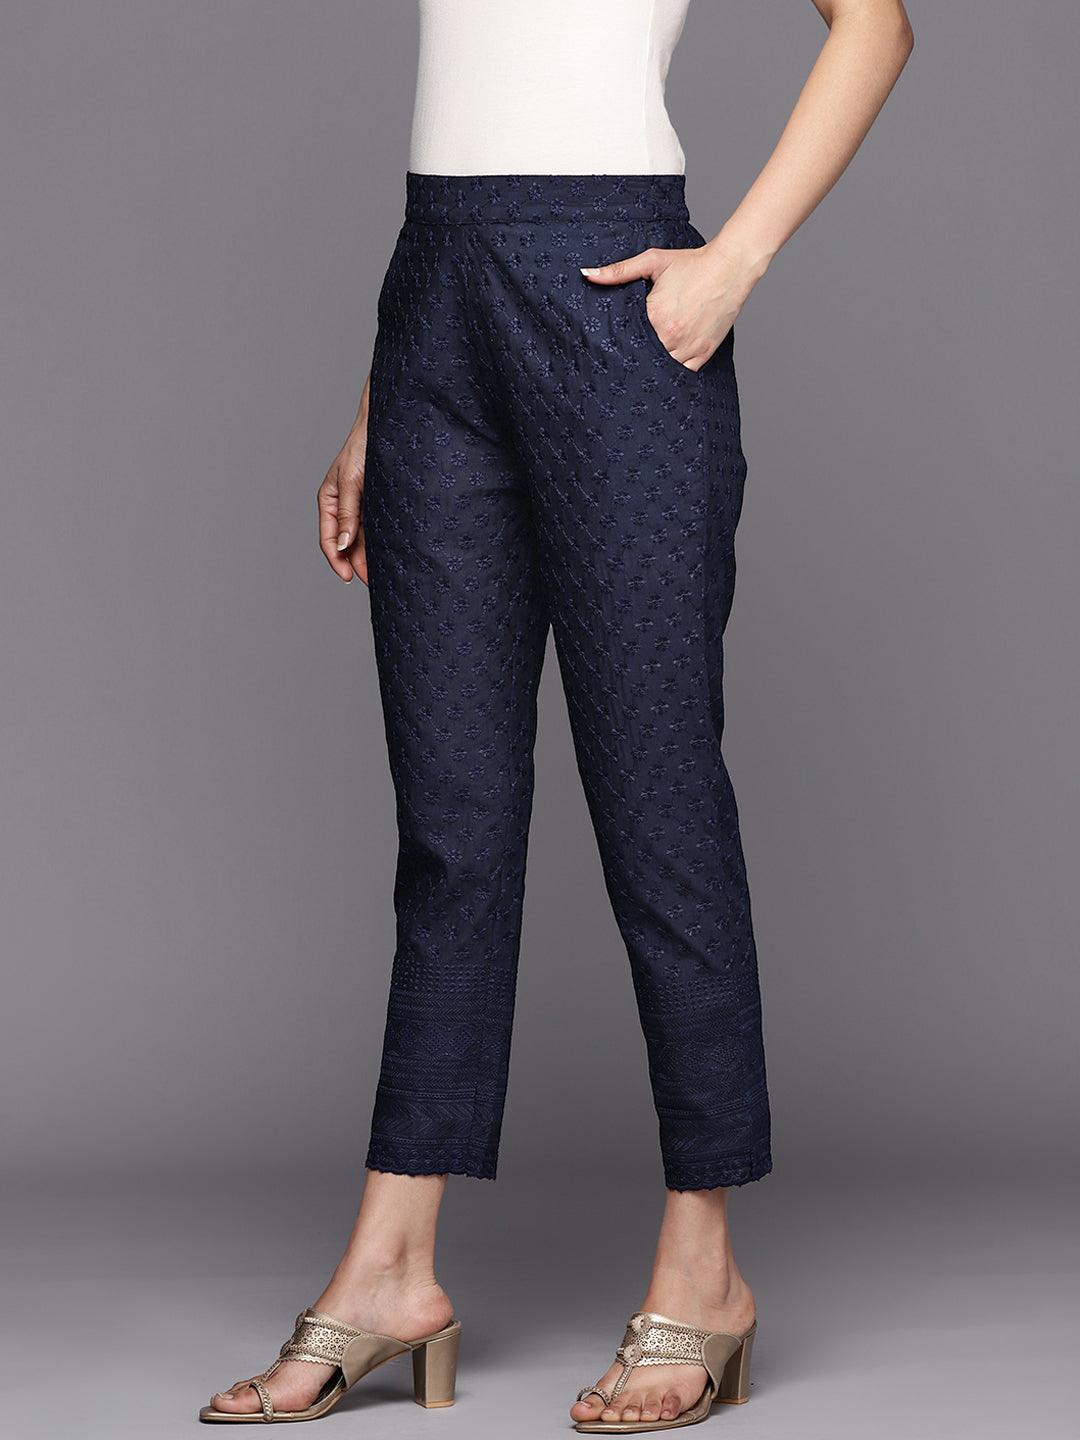 Navy Blue Embroidered Cotton Trousers